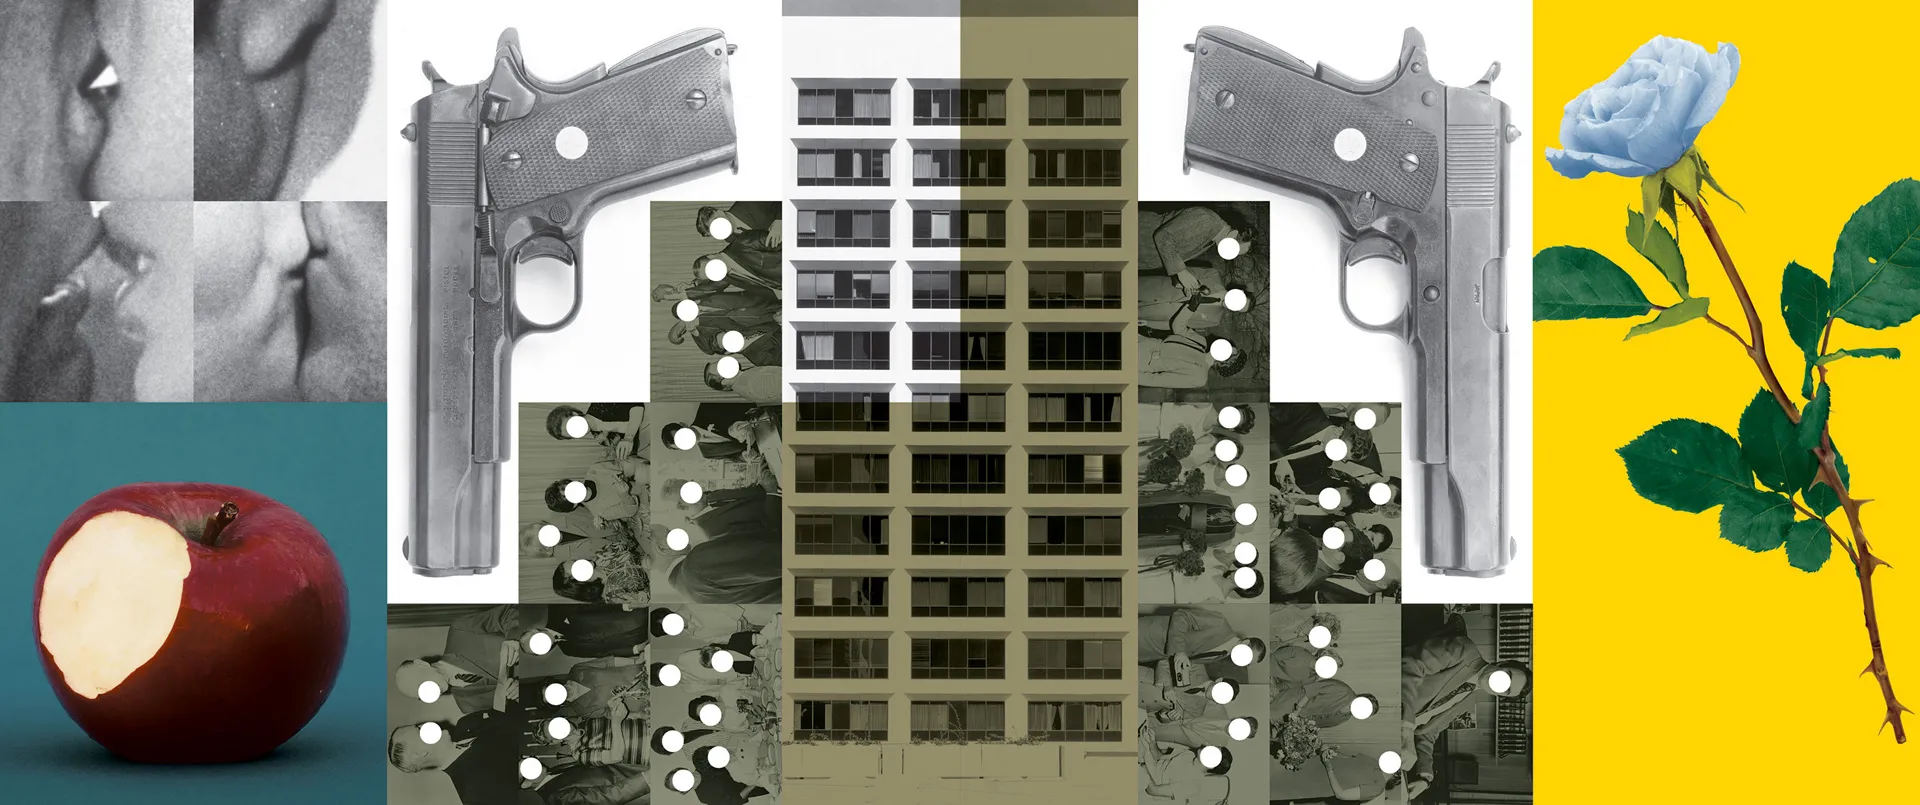 John Baldessari - Buildings=Guns=People: Desire, Knowledge, and Hope (with Smog), 1985, black-and-white and color photographs with vinyl paint and oil tint, mounted on five panels